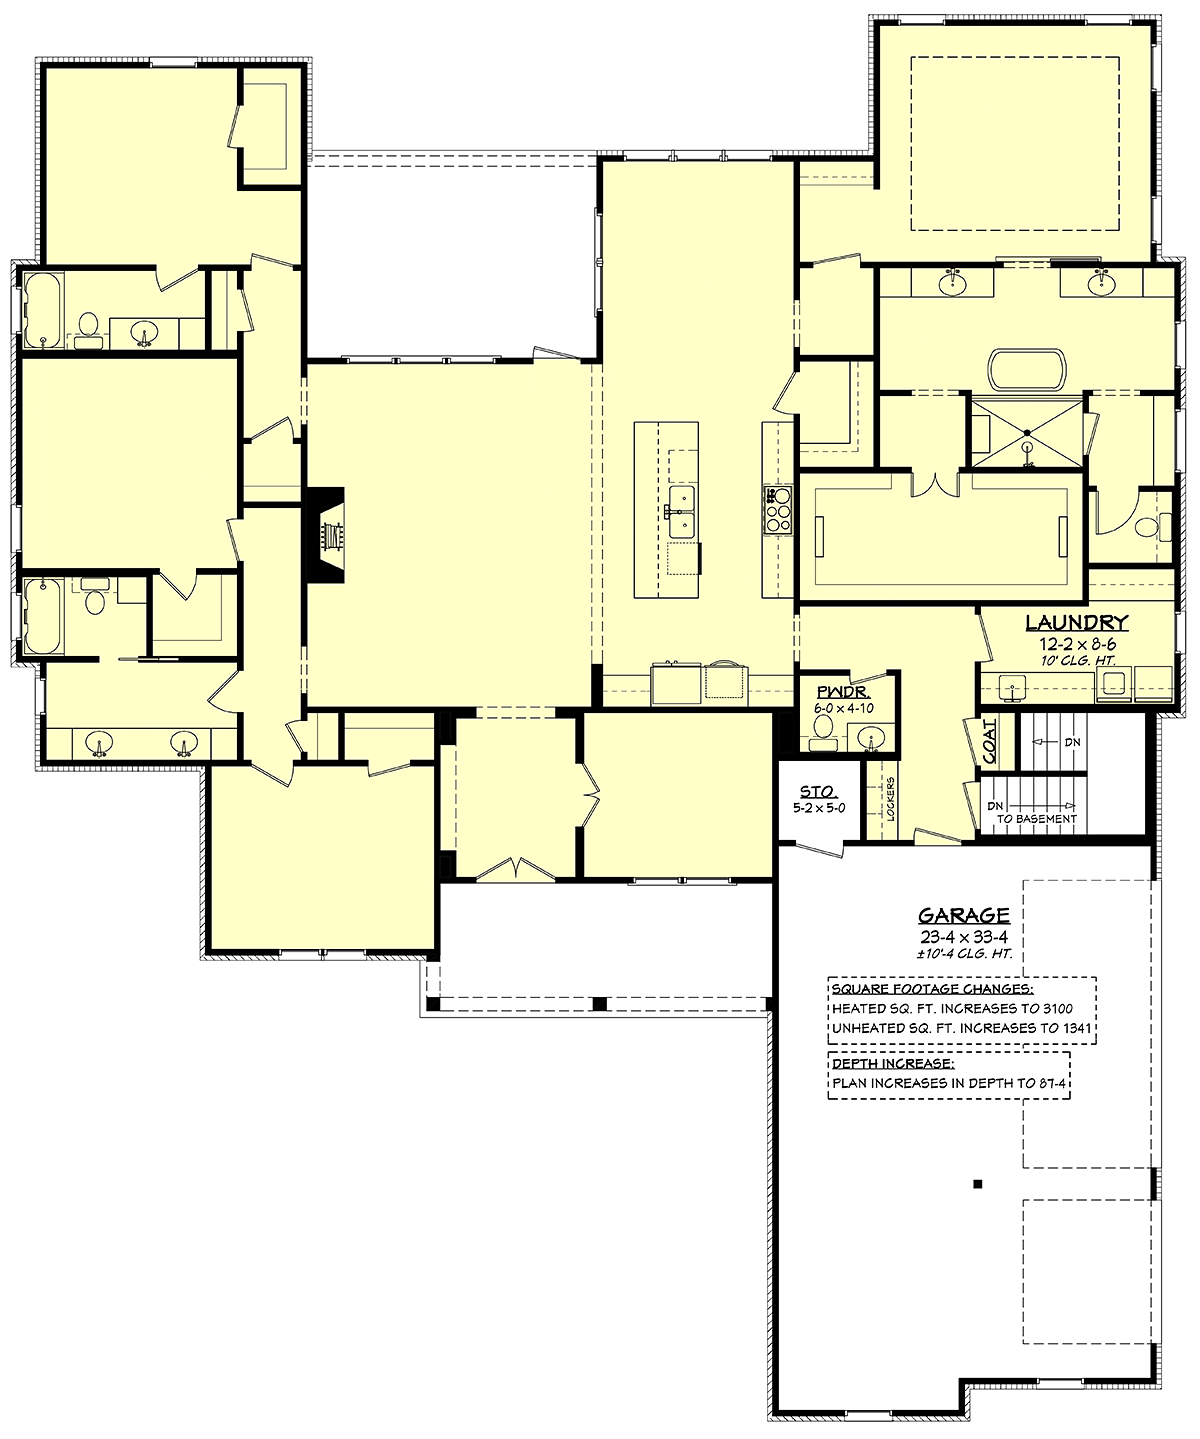 House Plan 80863 - Traditional Style with 3055 Sq Ft, 4 Bed, 3 Ba